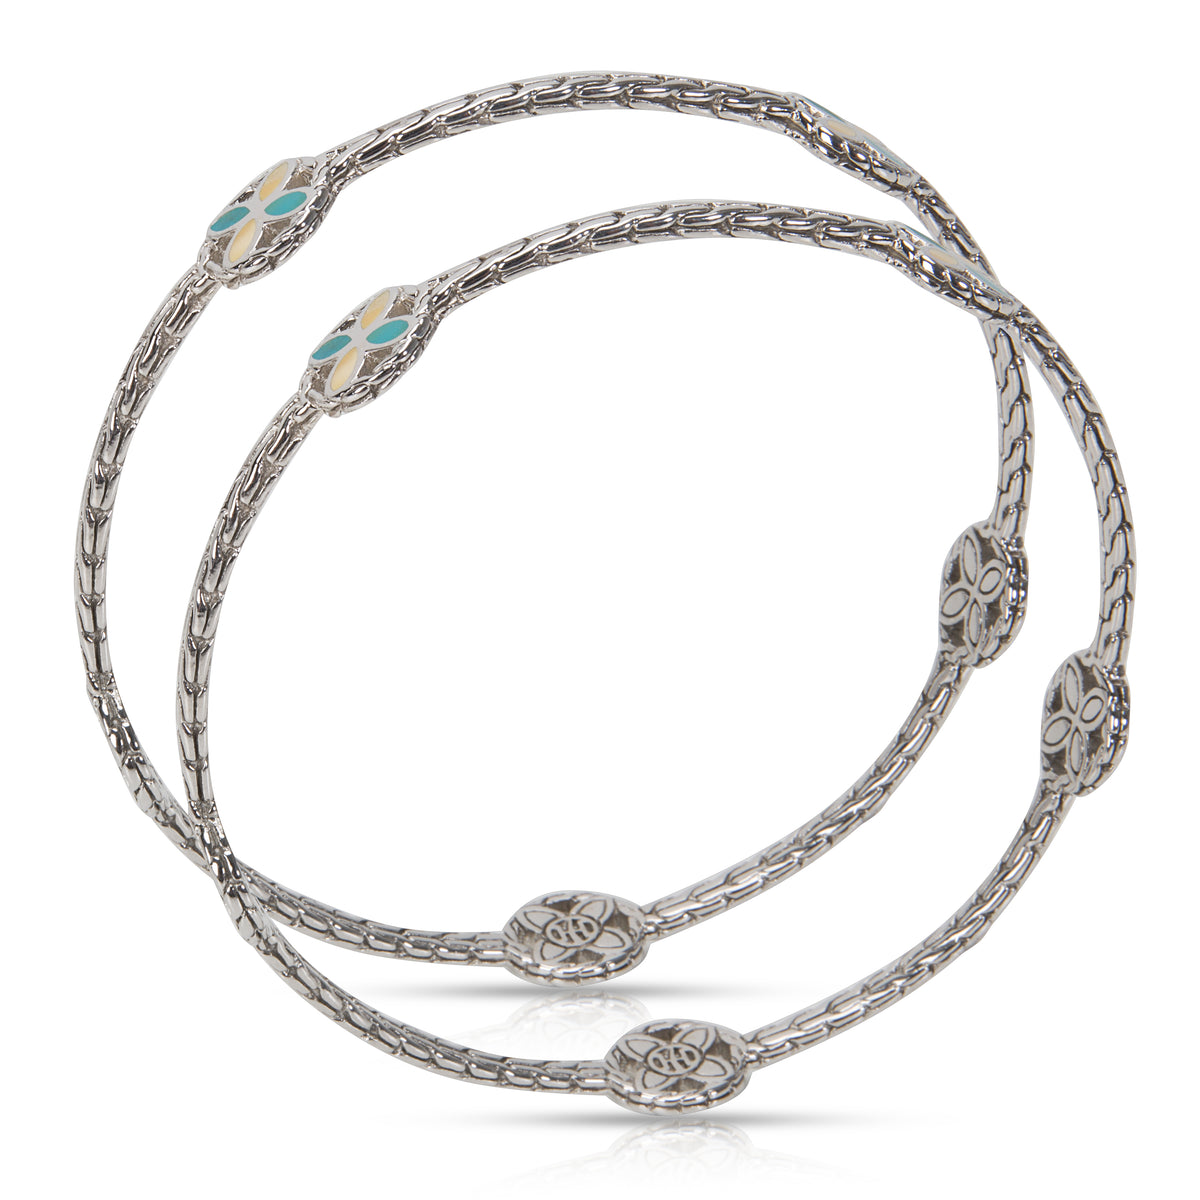 Batu Kawung Bangles 5 Flower Stations, Turquoise & Ivory in Sterling